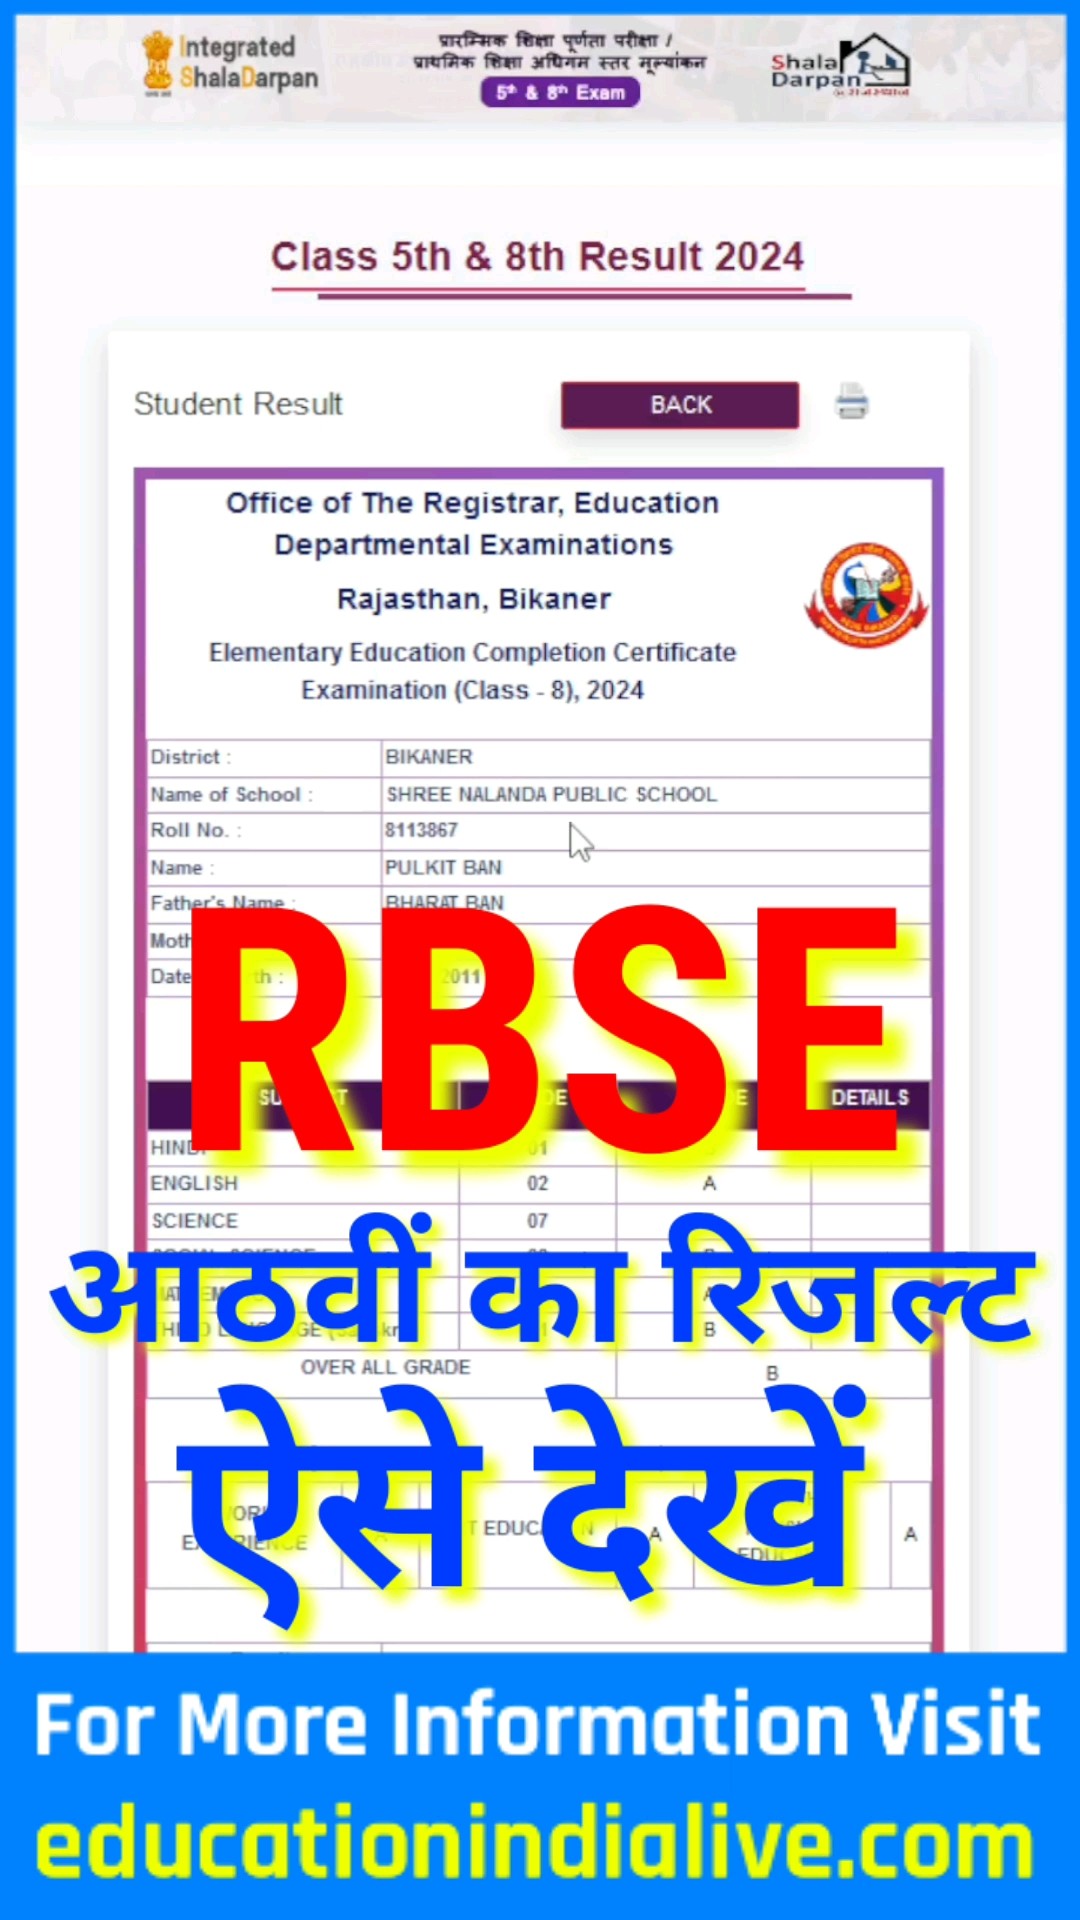 Rajasthan board class 5th new result check kaise kare 2024 | Rbse result class 5th